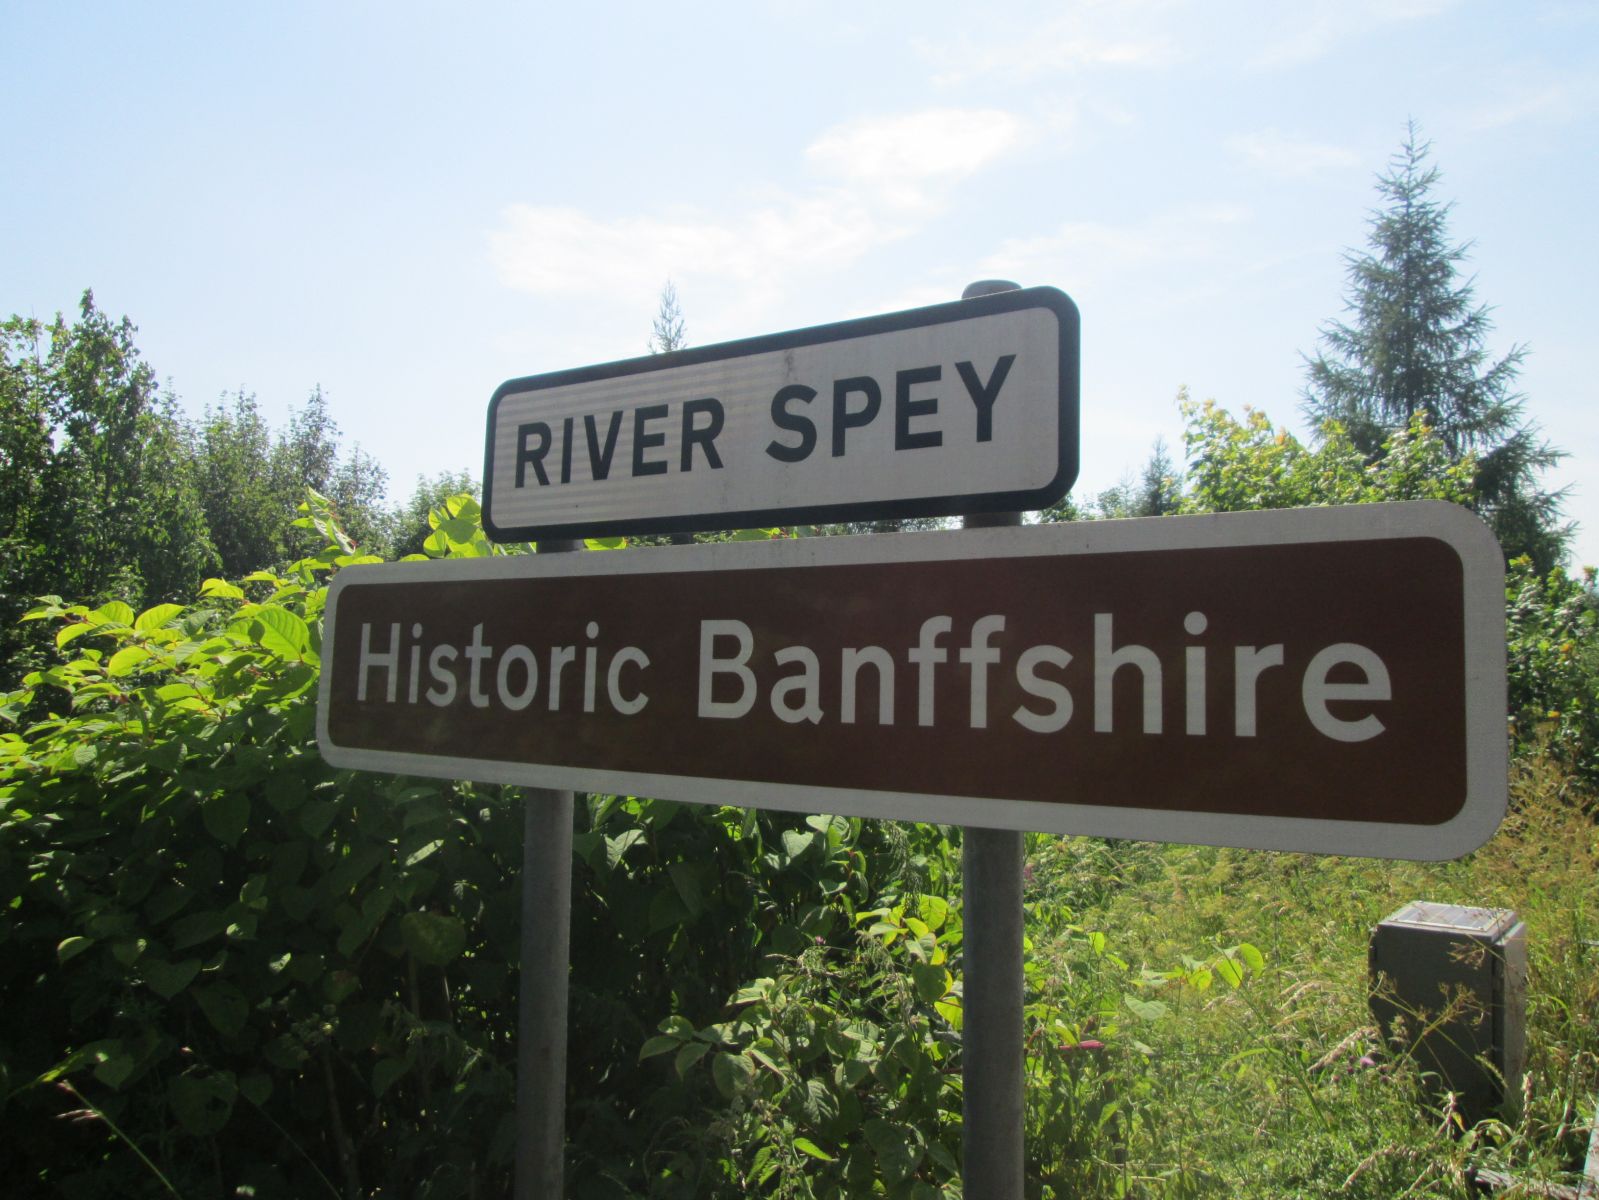 Where the Speyside region gets its name from.